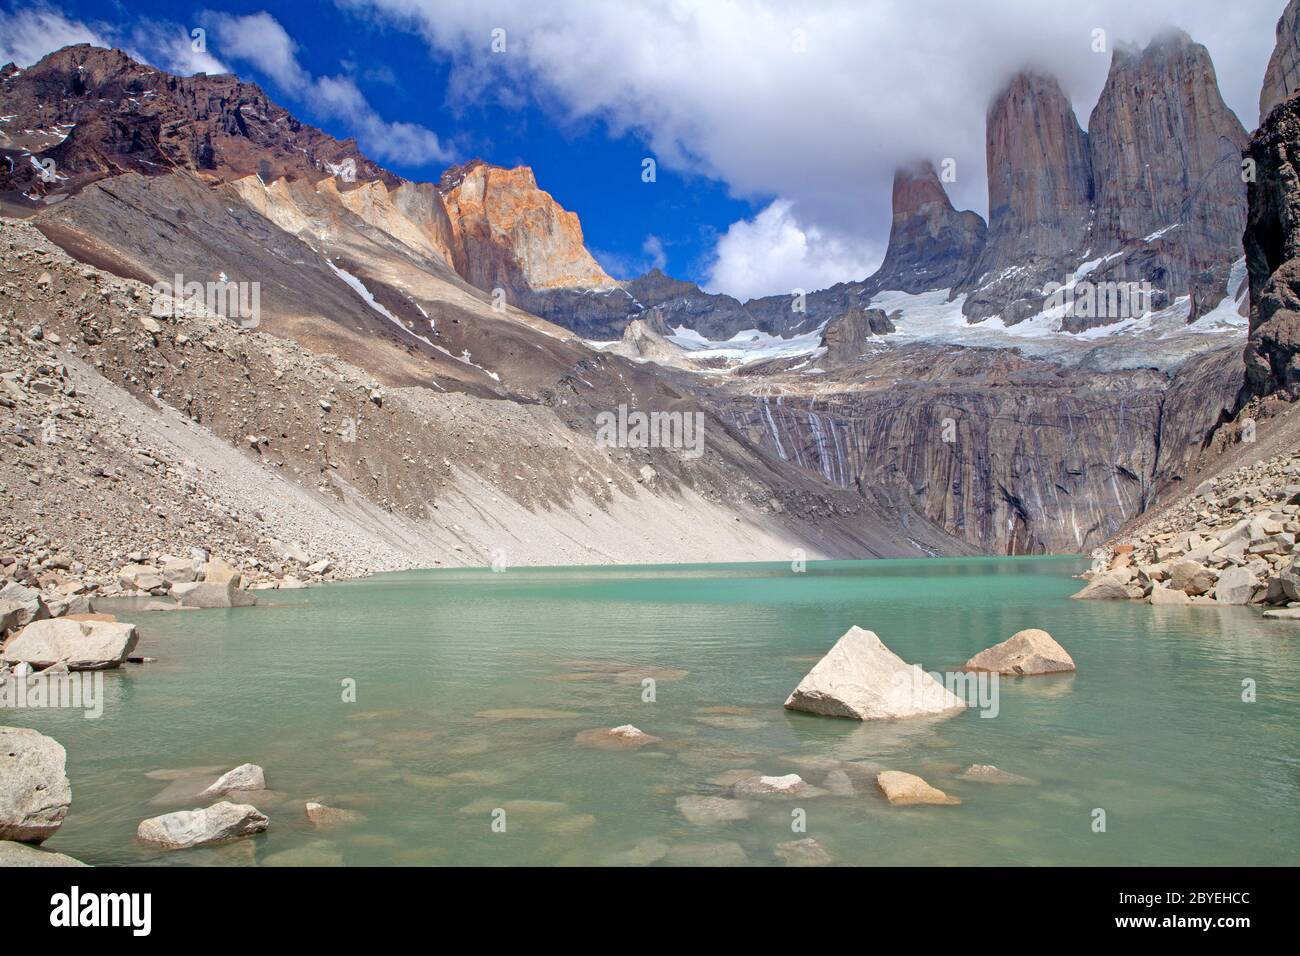 The towers of the Torres del Paine Stock Photo